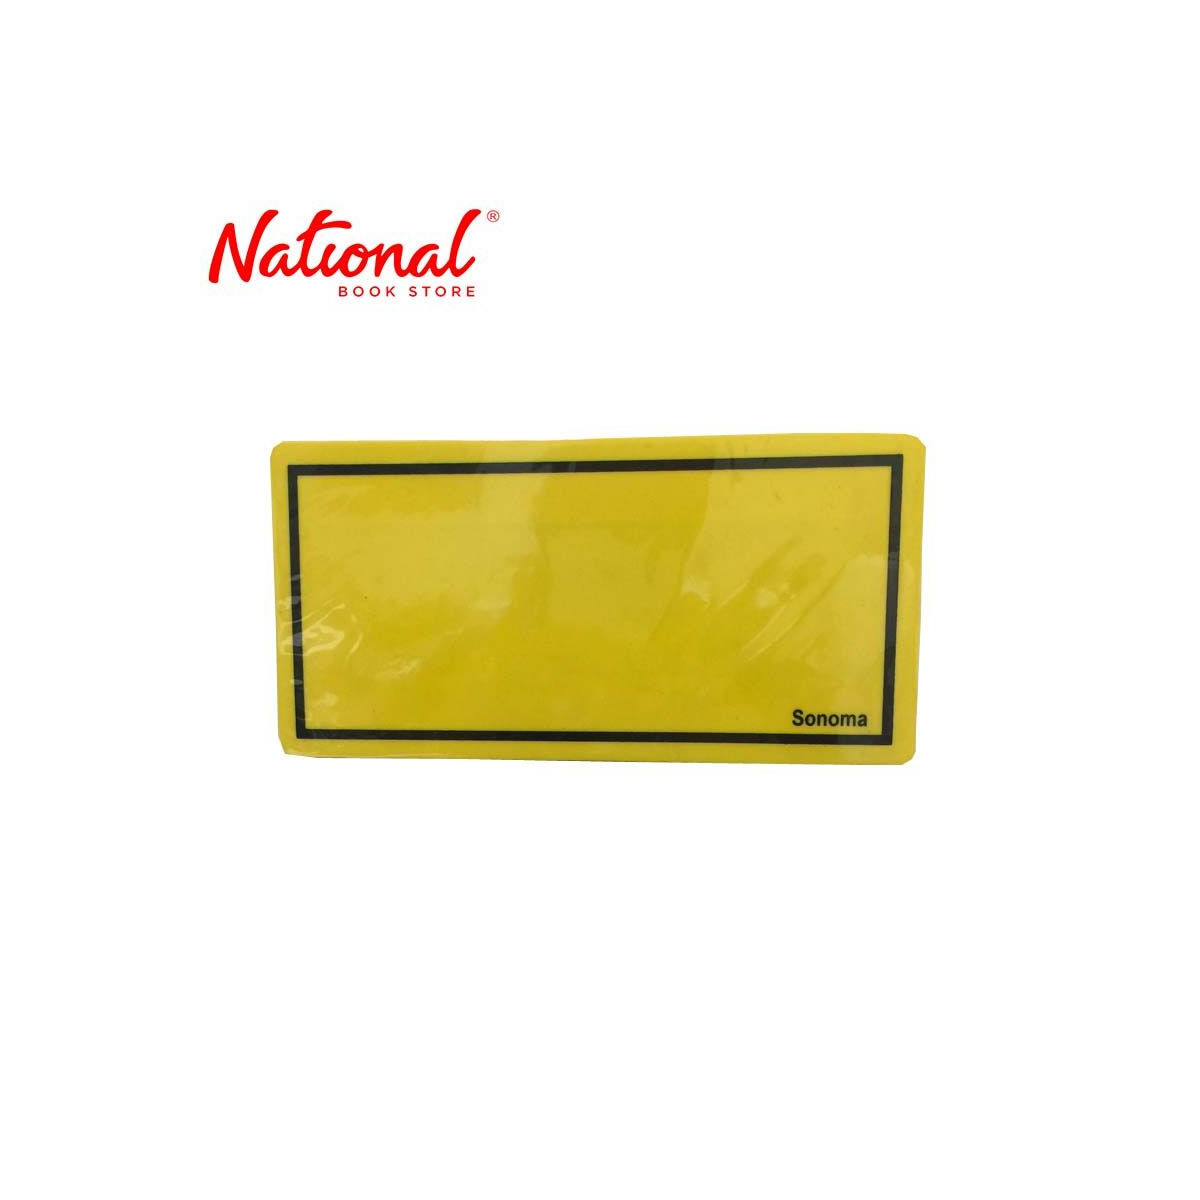 Sonoma Signage 4x8 inches Yellow Blank - Office Supplies